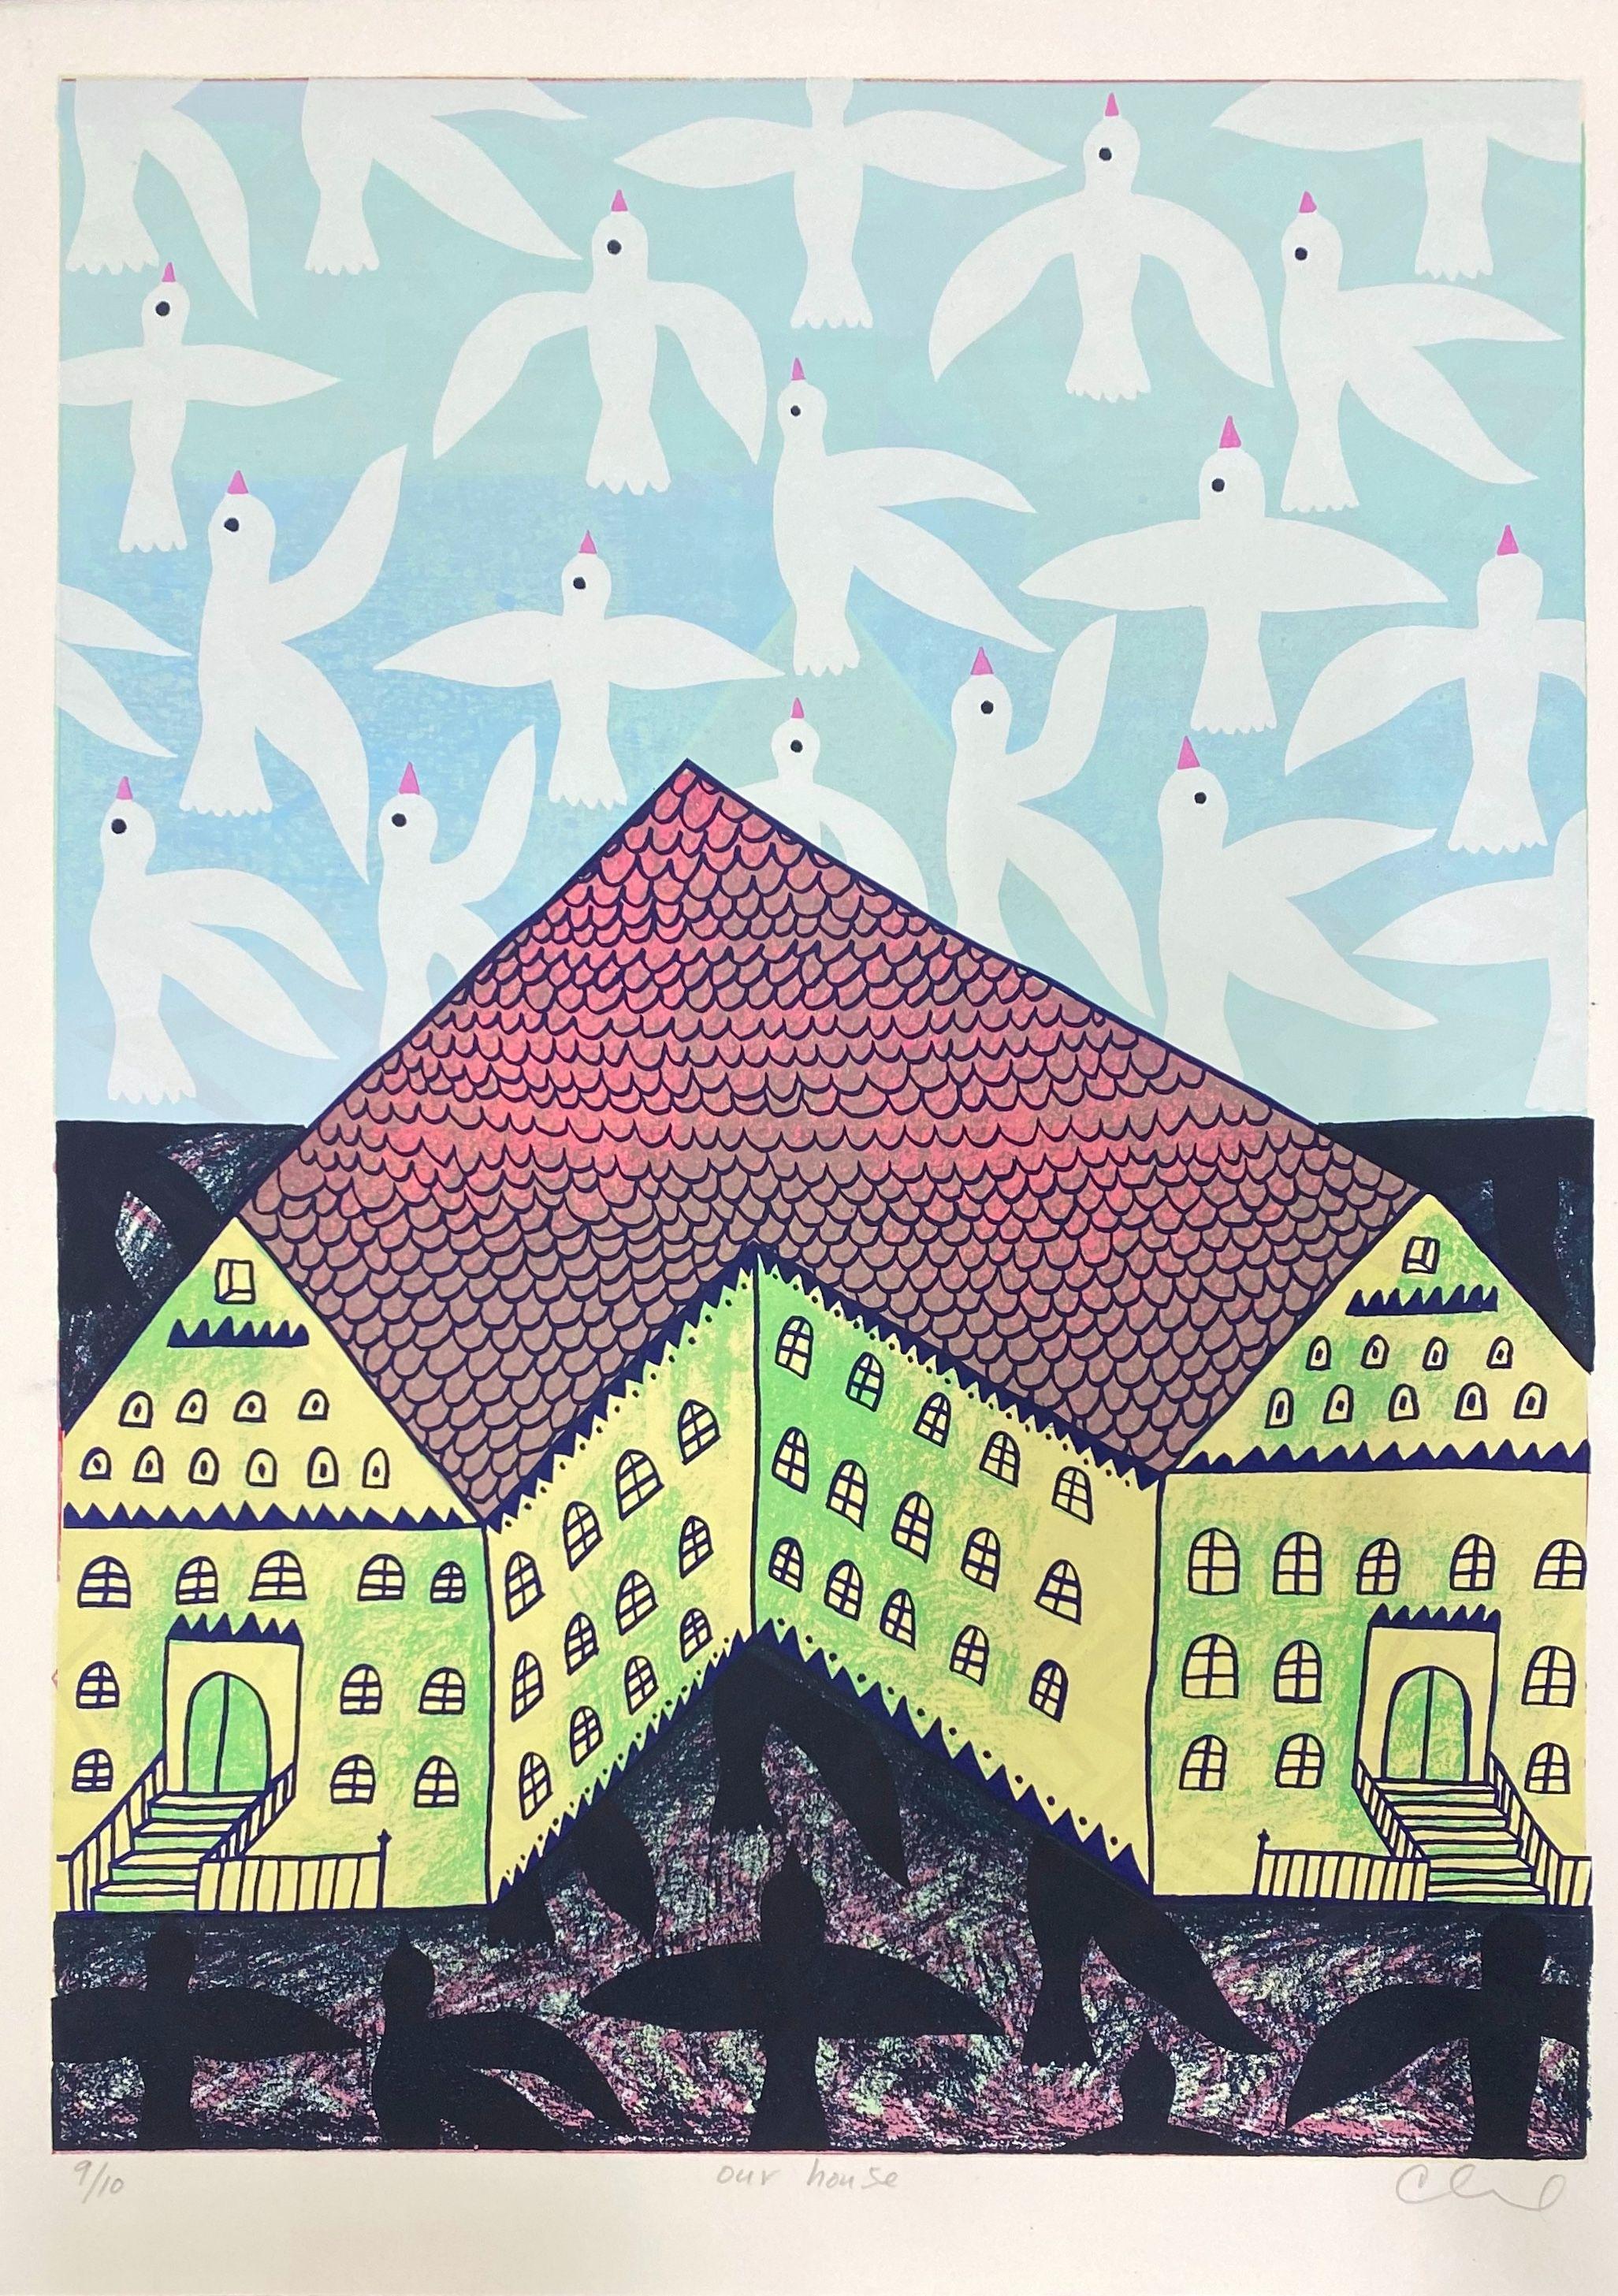 Chadwick Tolley Abstract Print - Our House (7/10)